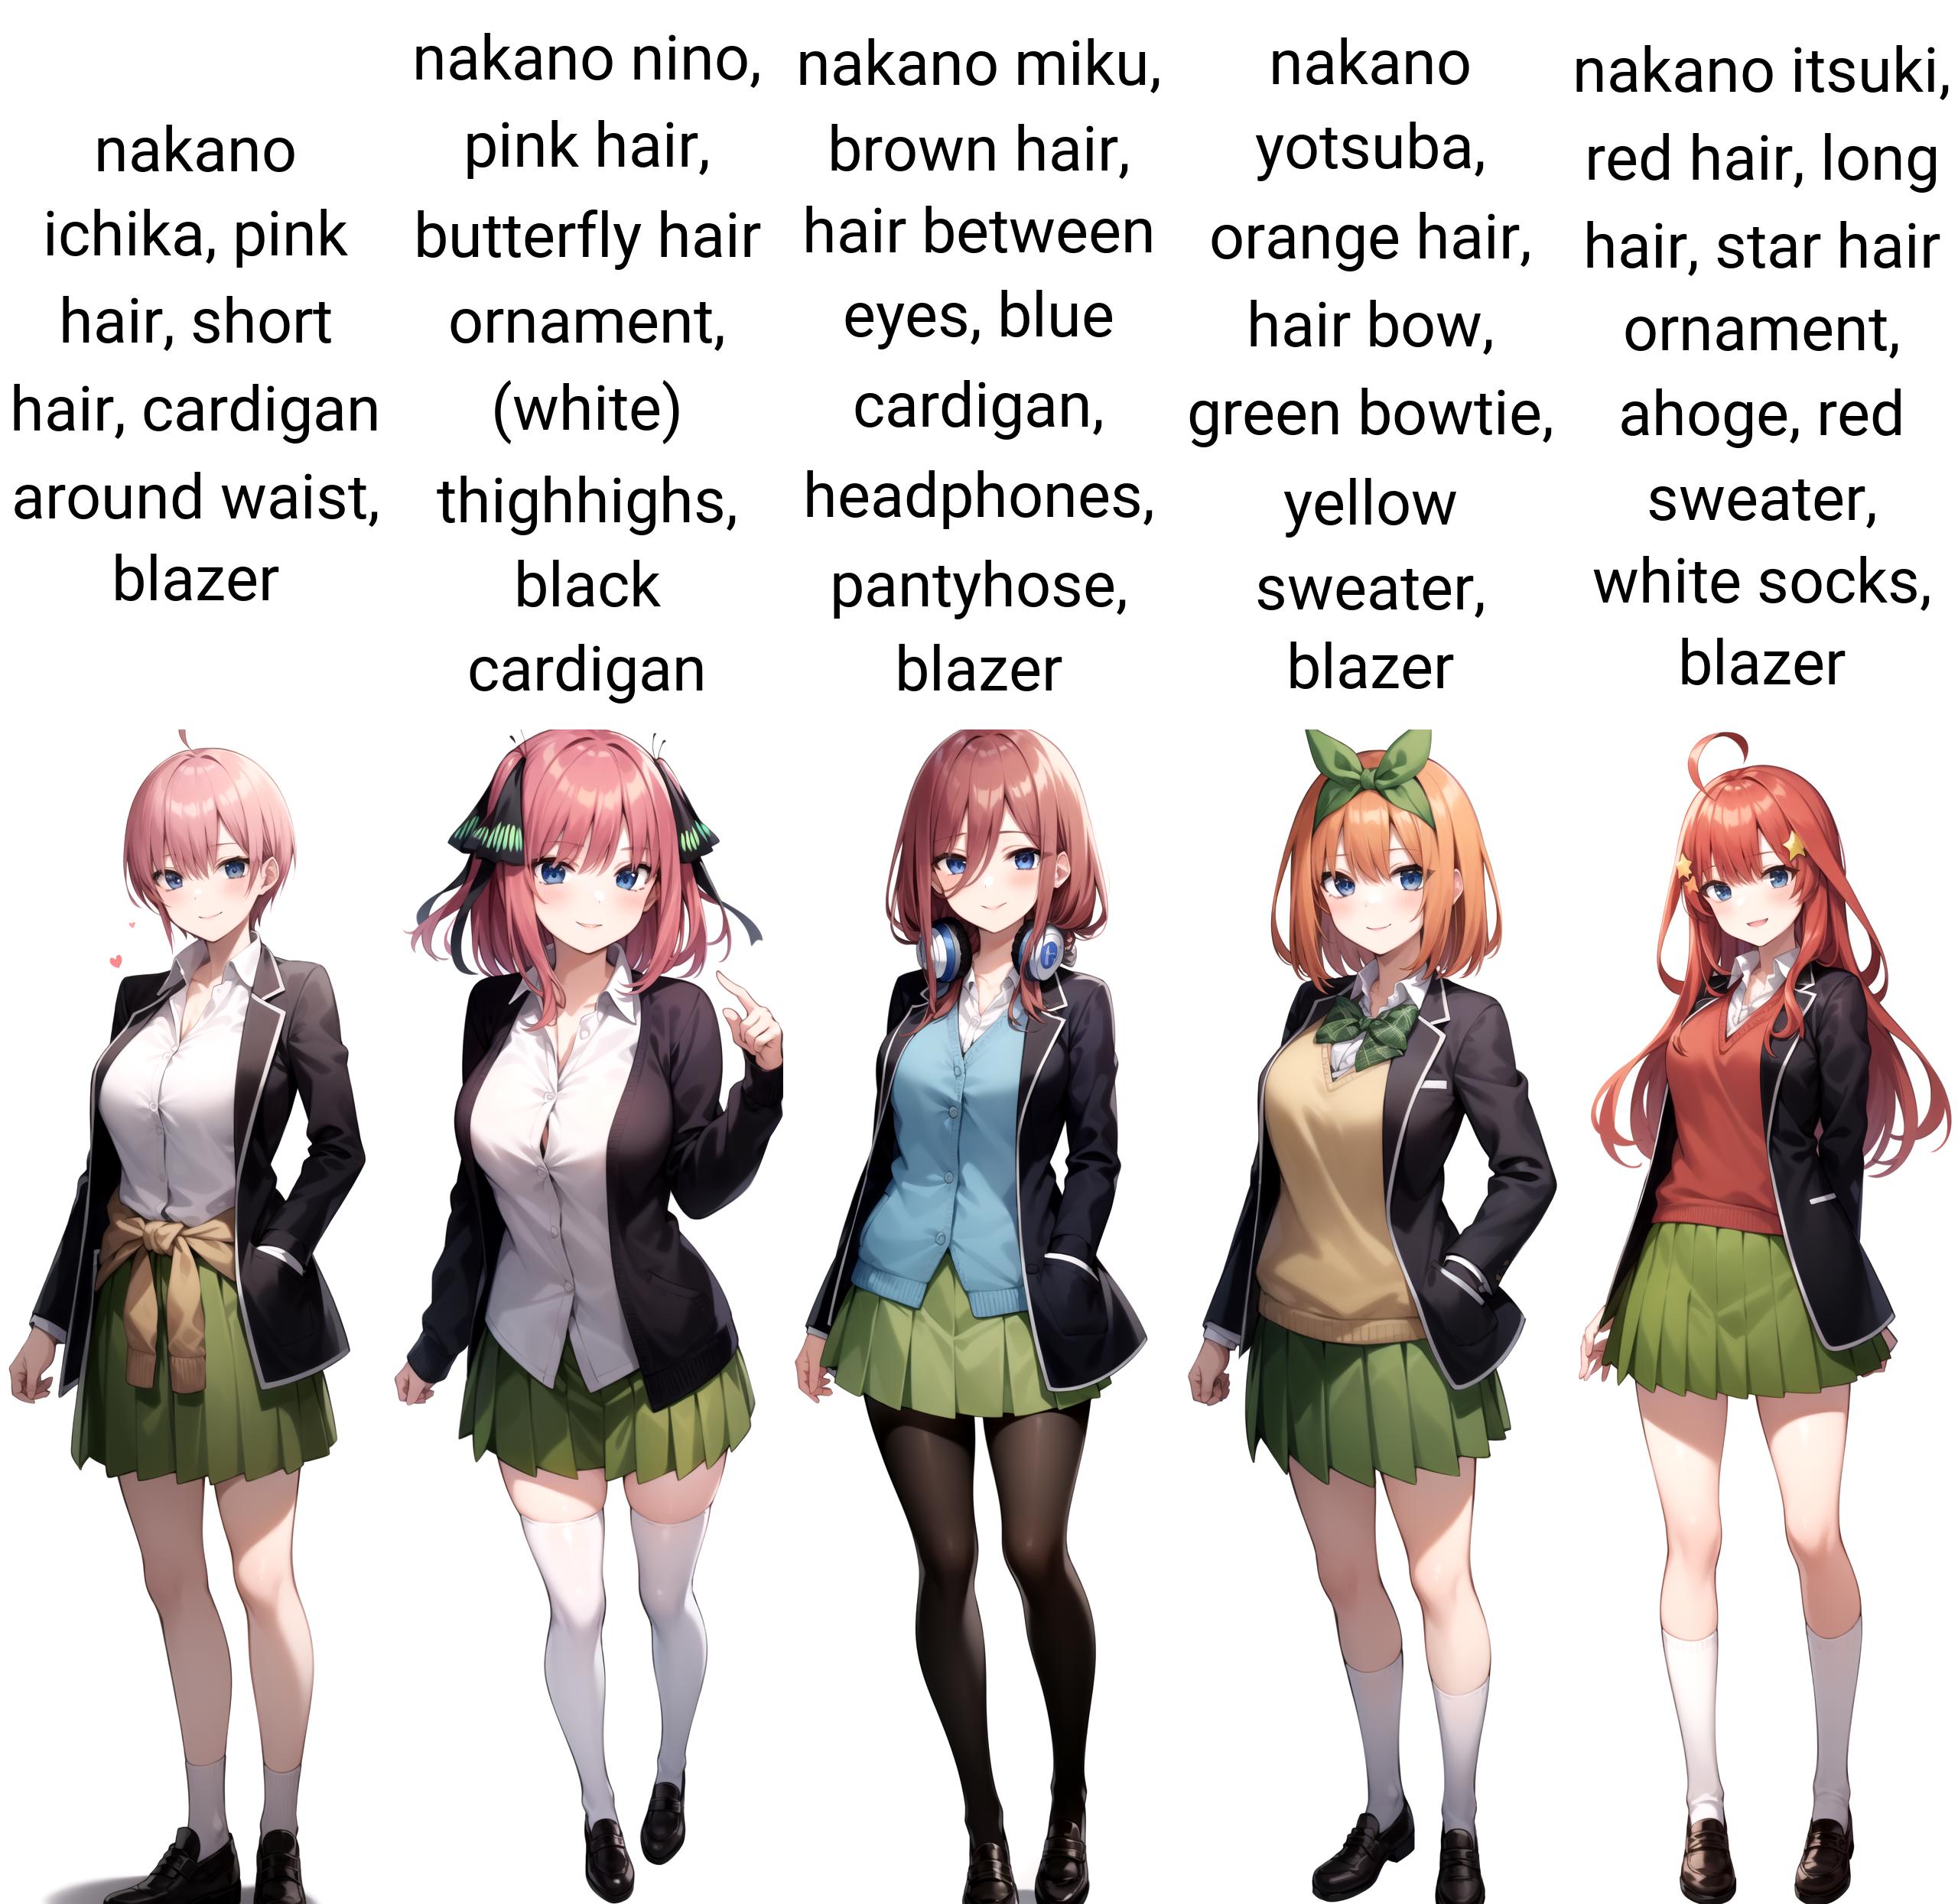 Four Anime Characters in School Uniforms with Pink, Blue, Orange, and Green Hair.